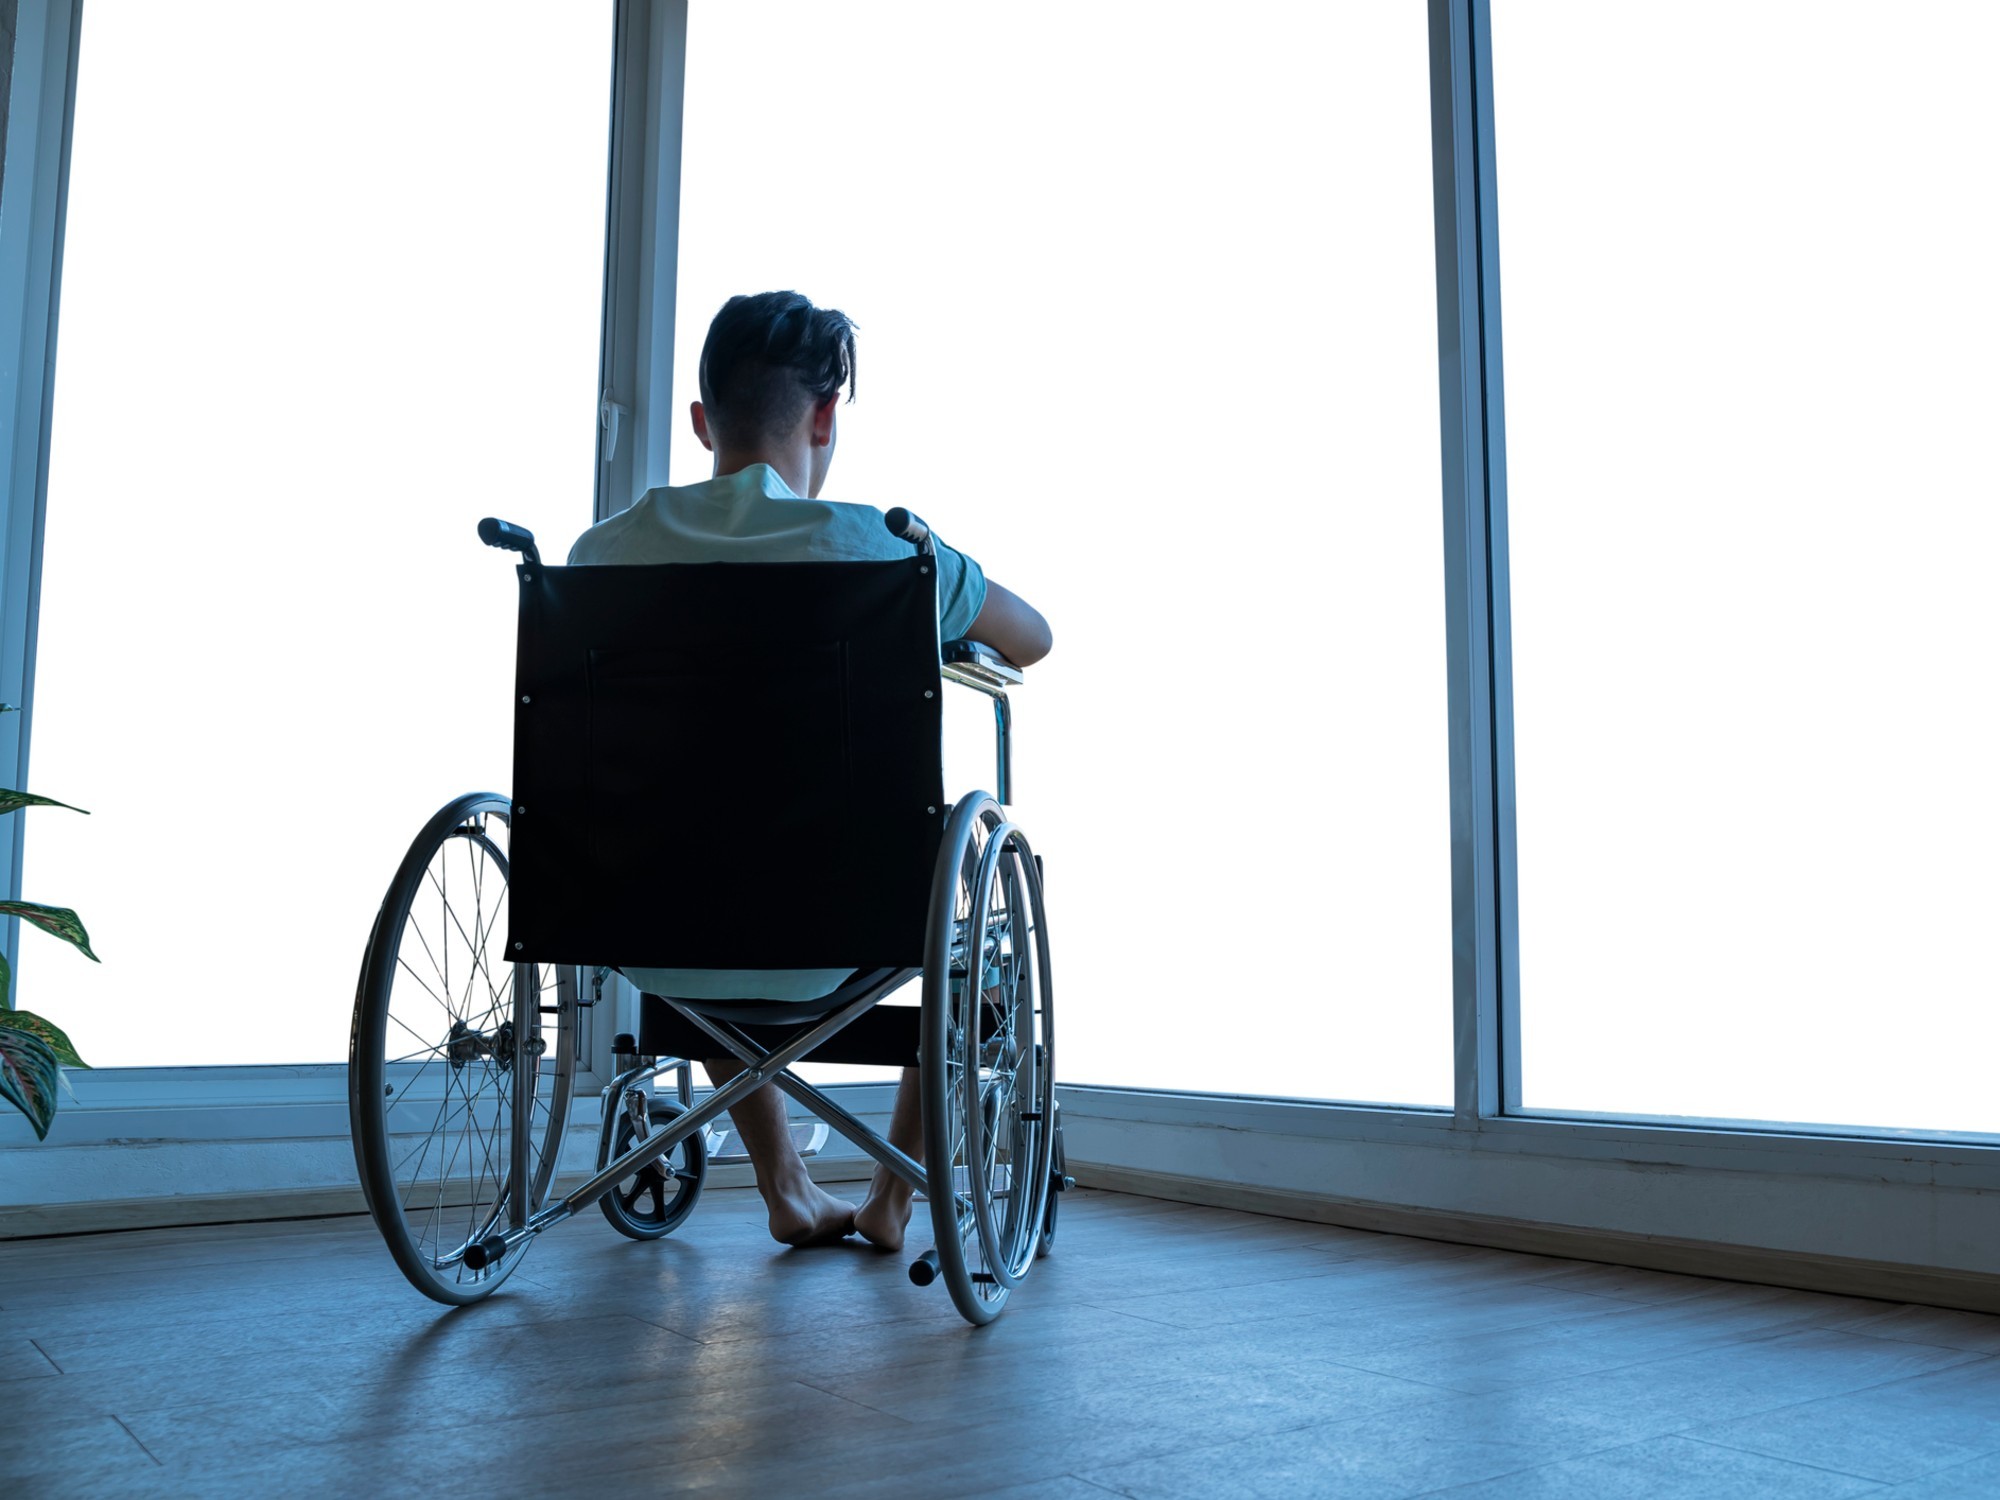 Taking care of your mental health when living with a disability